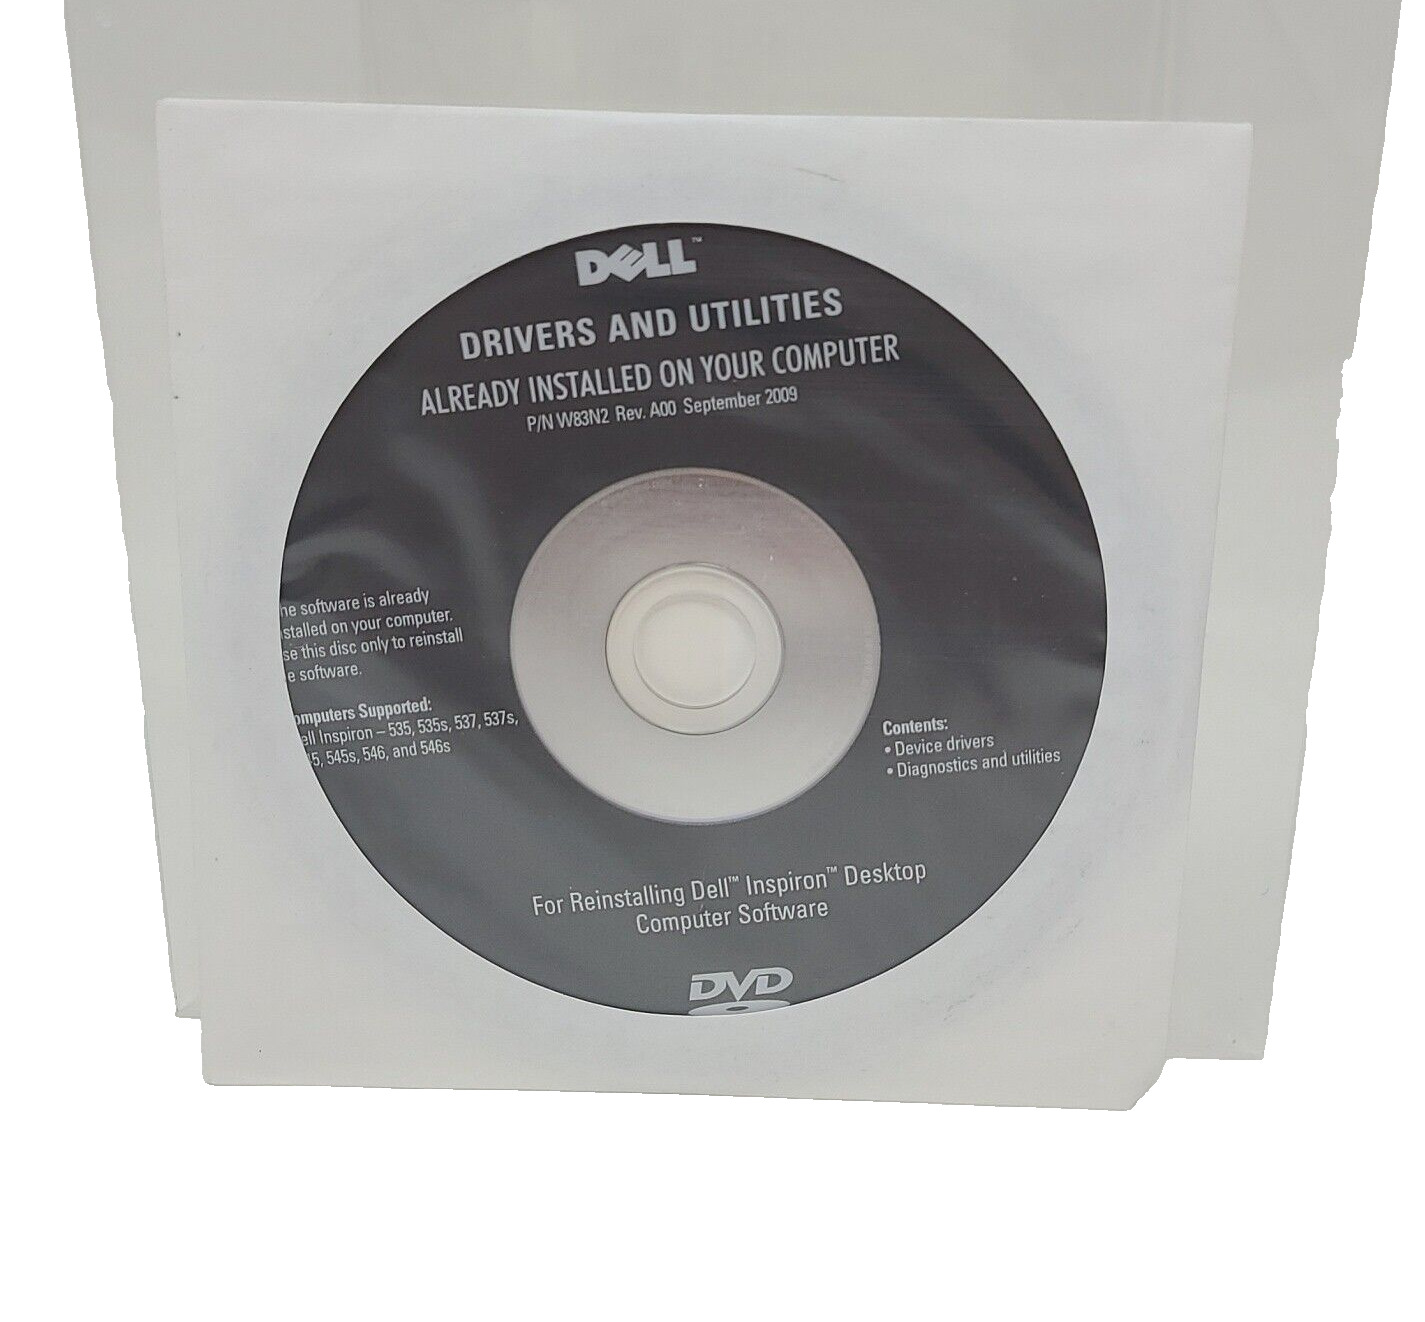 DELL Drivers and Utilities Inspiron 537 537s computer software 2009 NEW